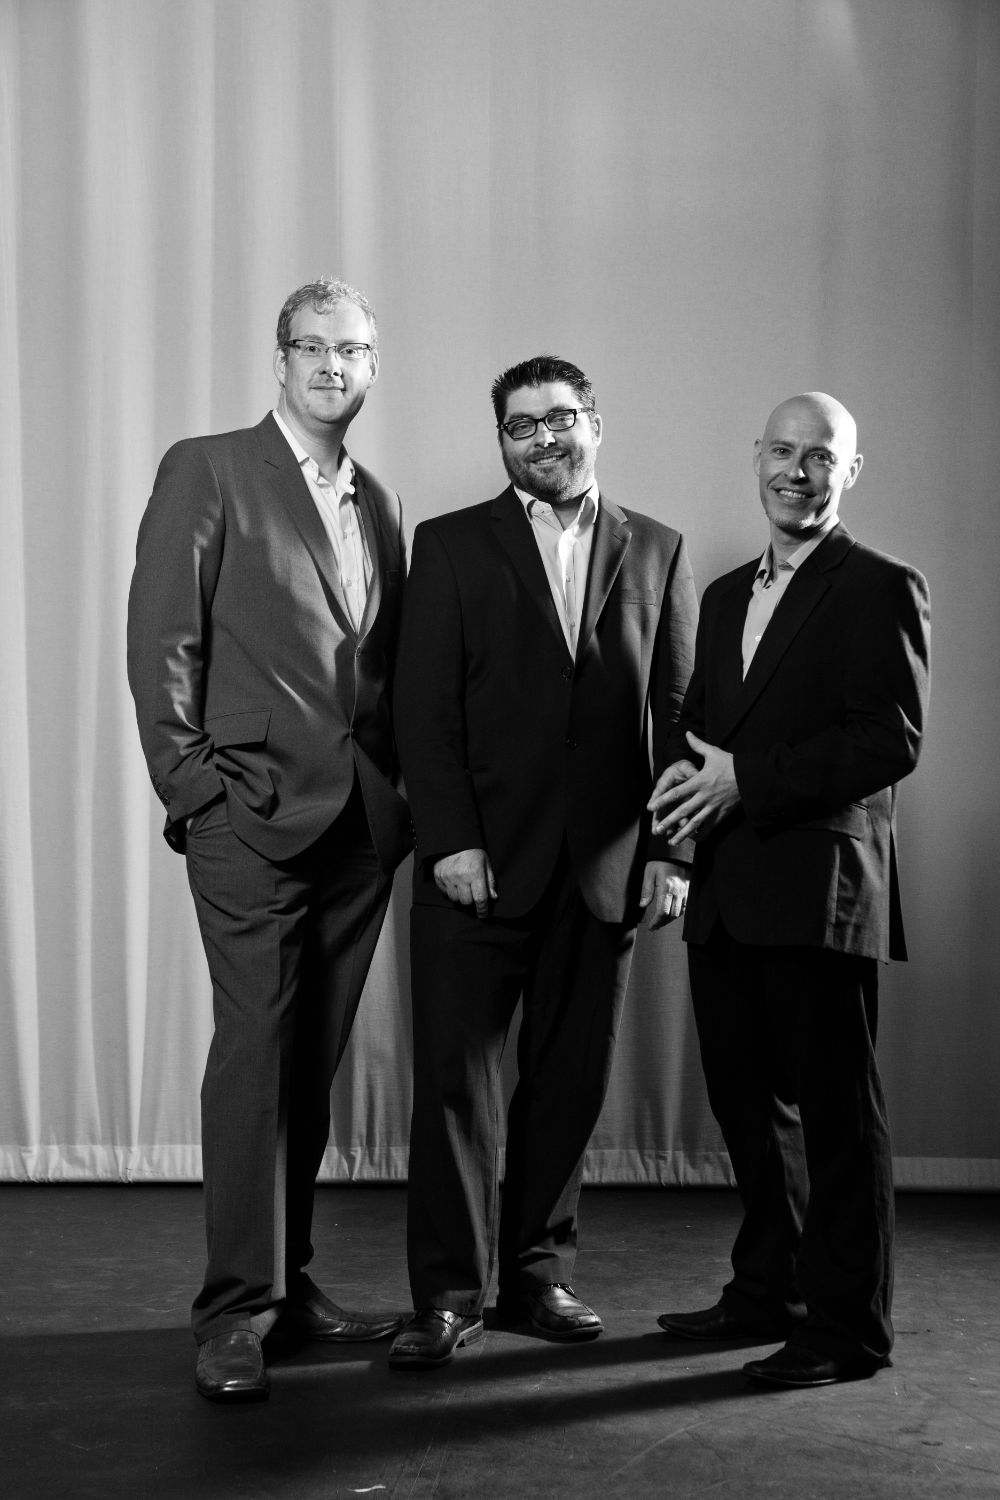 The Brotherhood corporate band experience jazz trio musicians